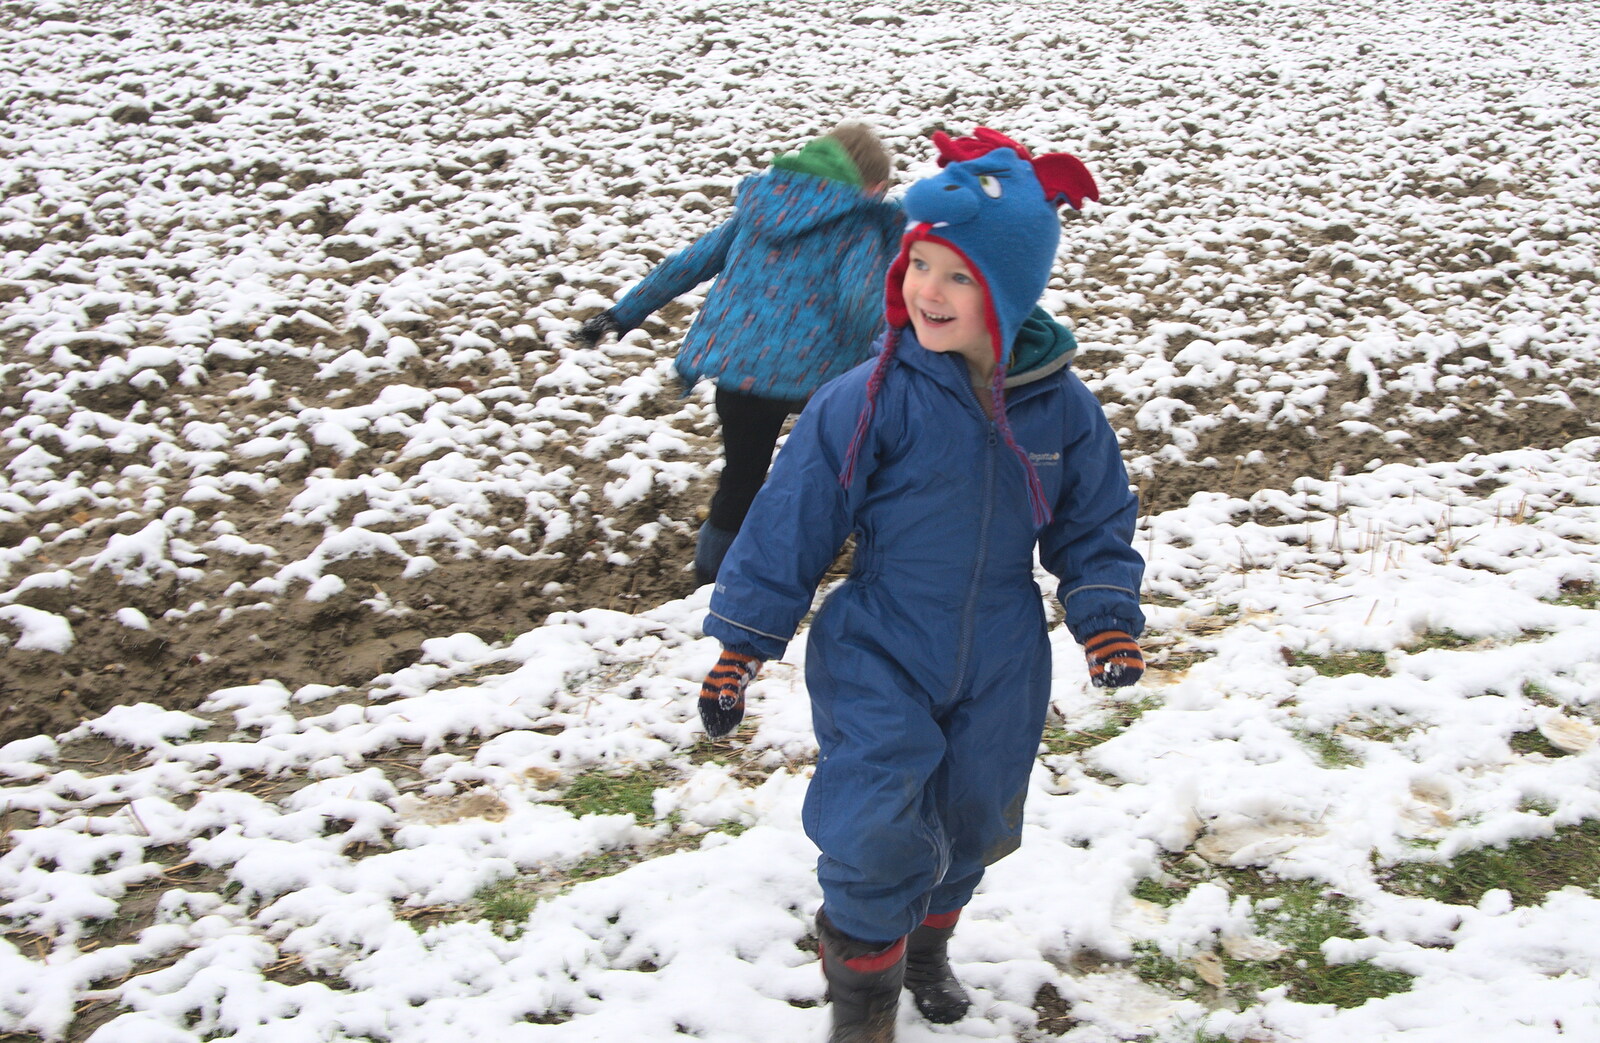 Harry in his snowsuit from A Snowy Day, Brome, Suffolk - 12th February 2017